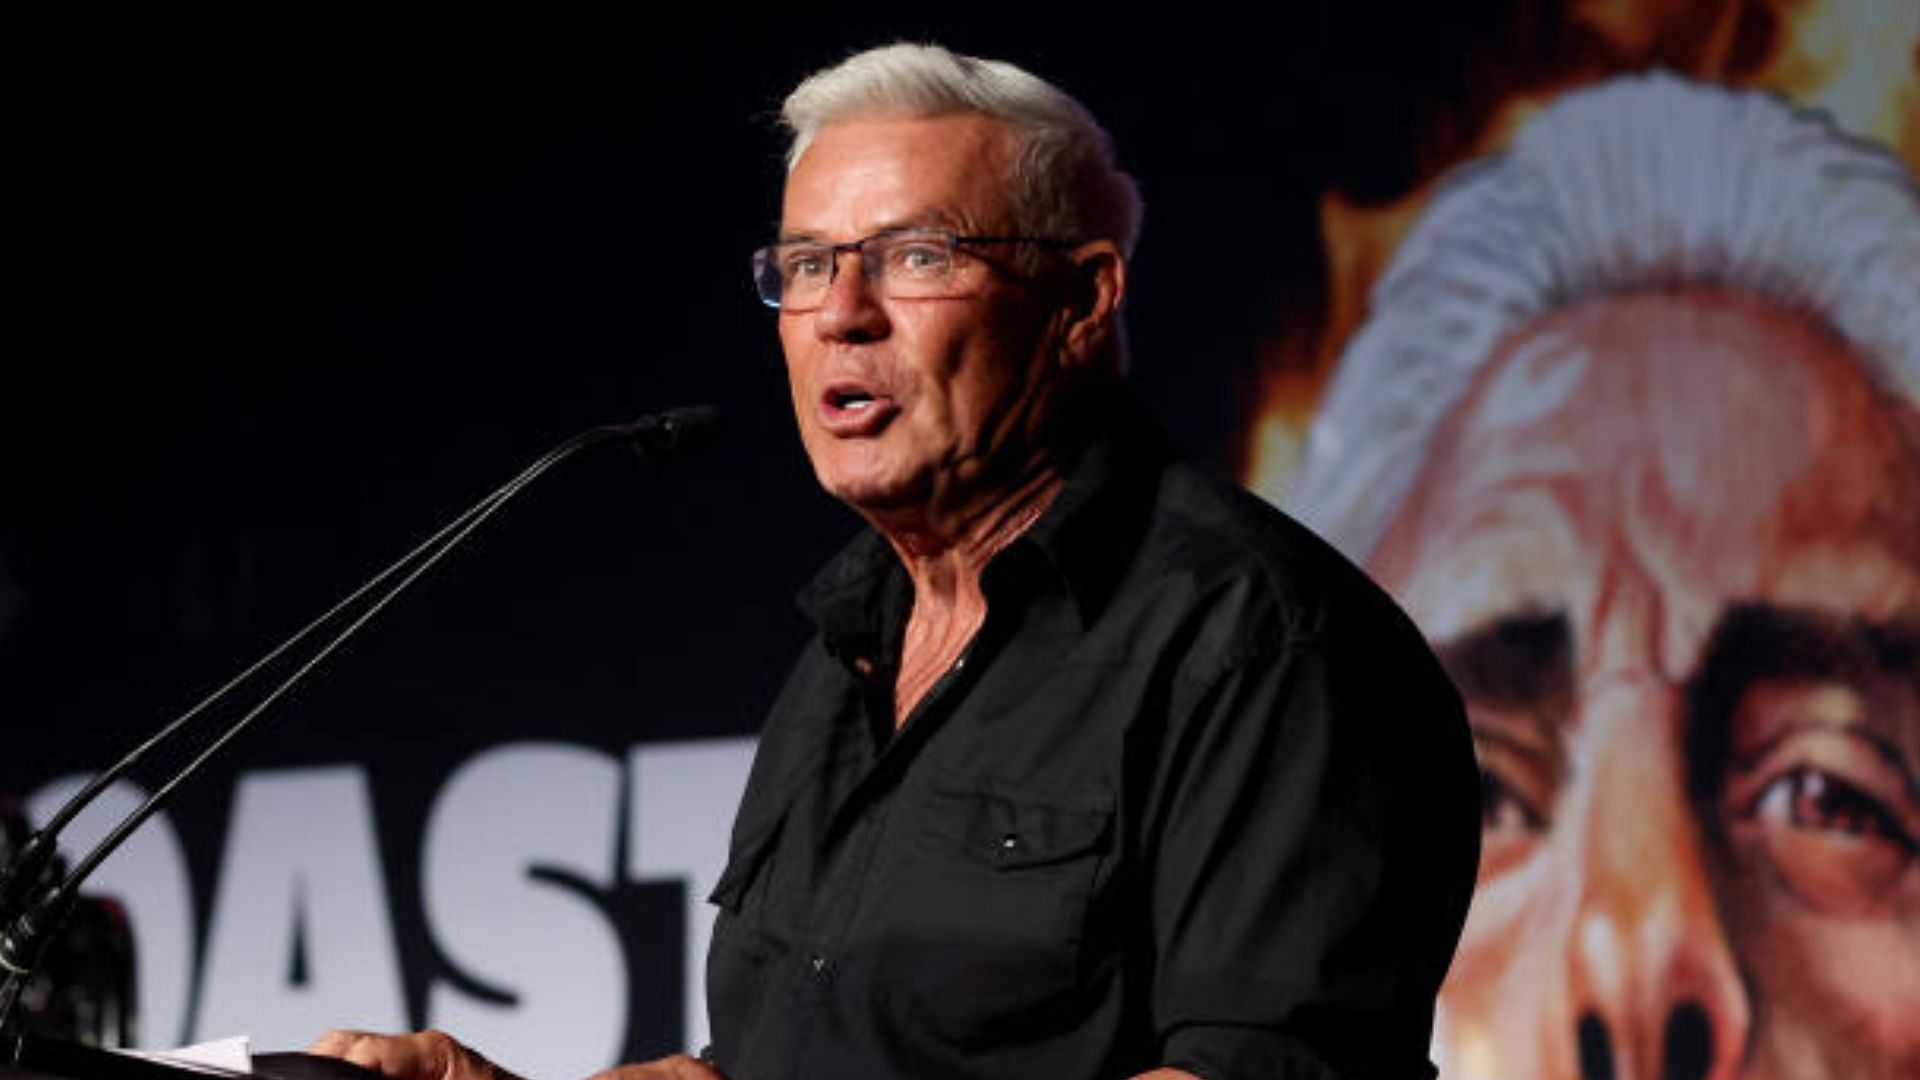 Is Eric Bischoff seeing something many fans are missing?